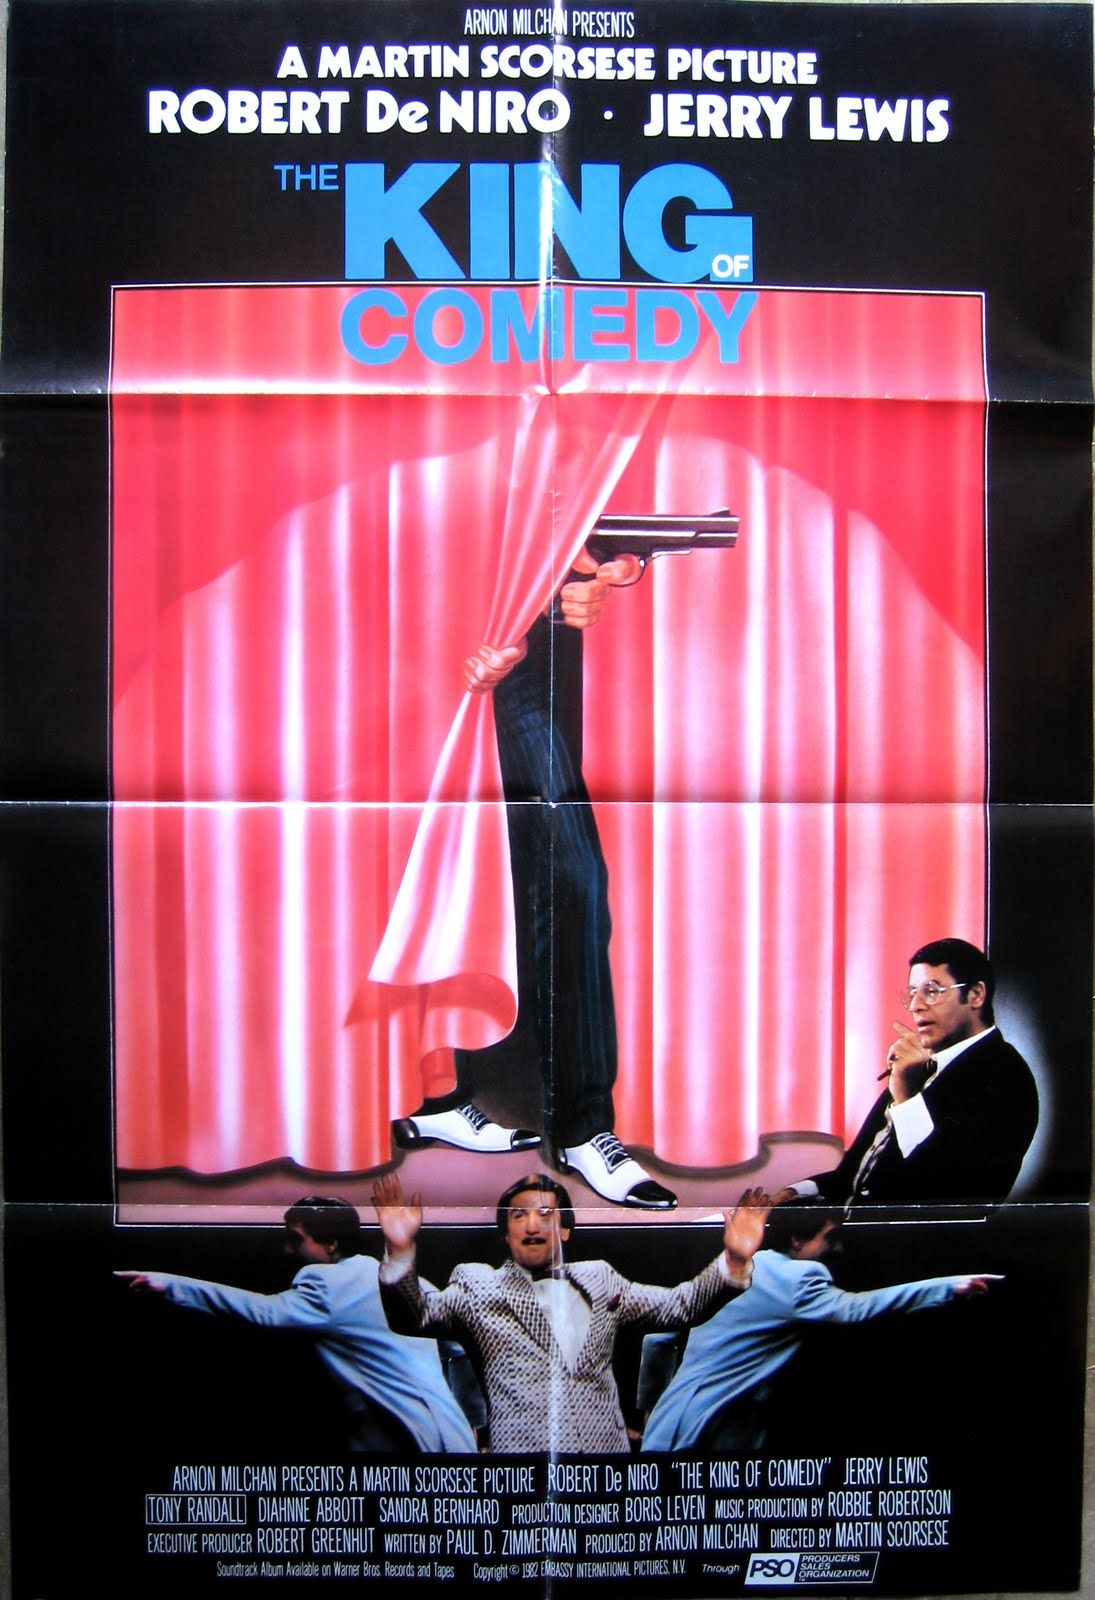 The King of Comedy. Comedy movies posters, Martin scorsese movies